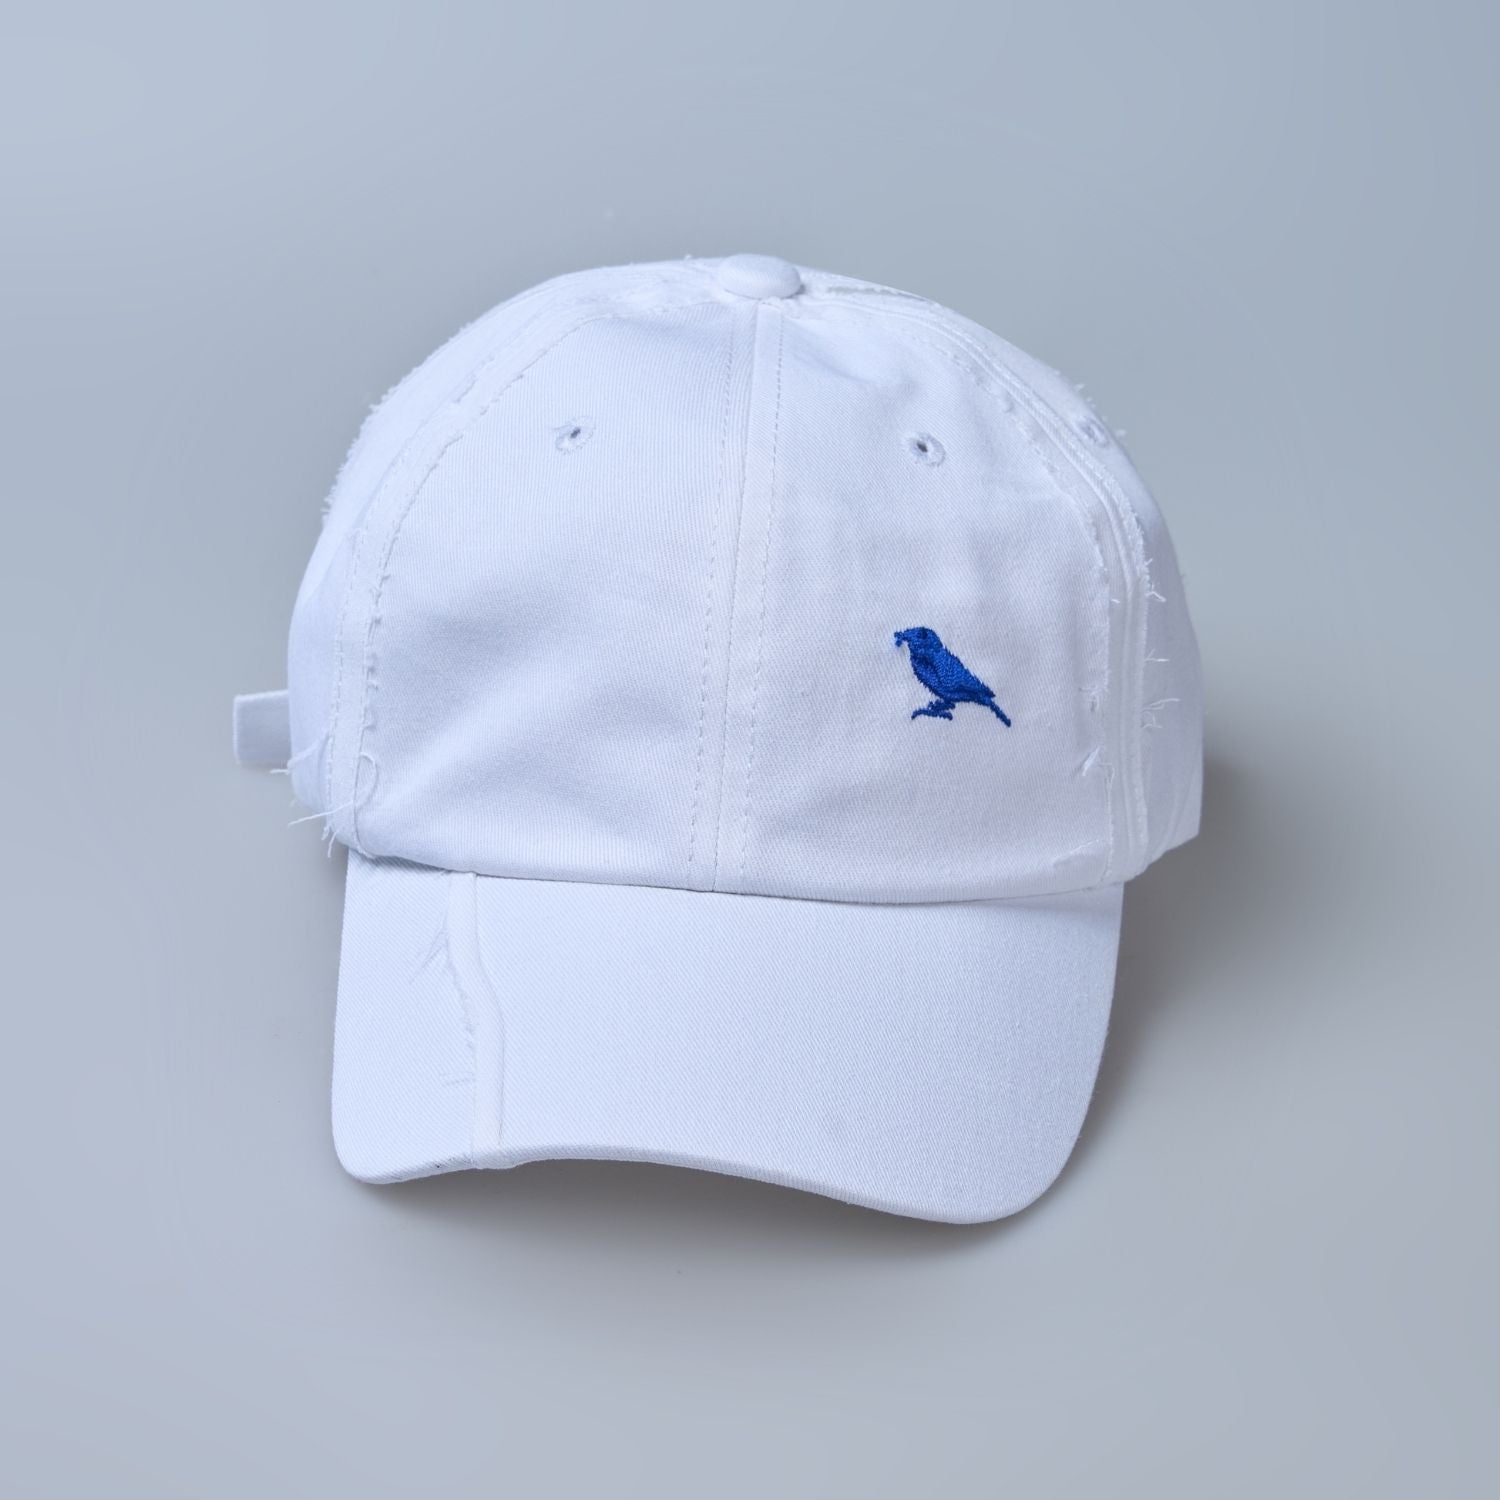 white colored, wide brim polo cap for men with adjustable strap, front view.